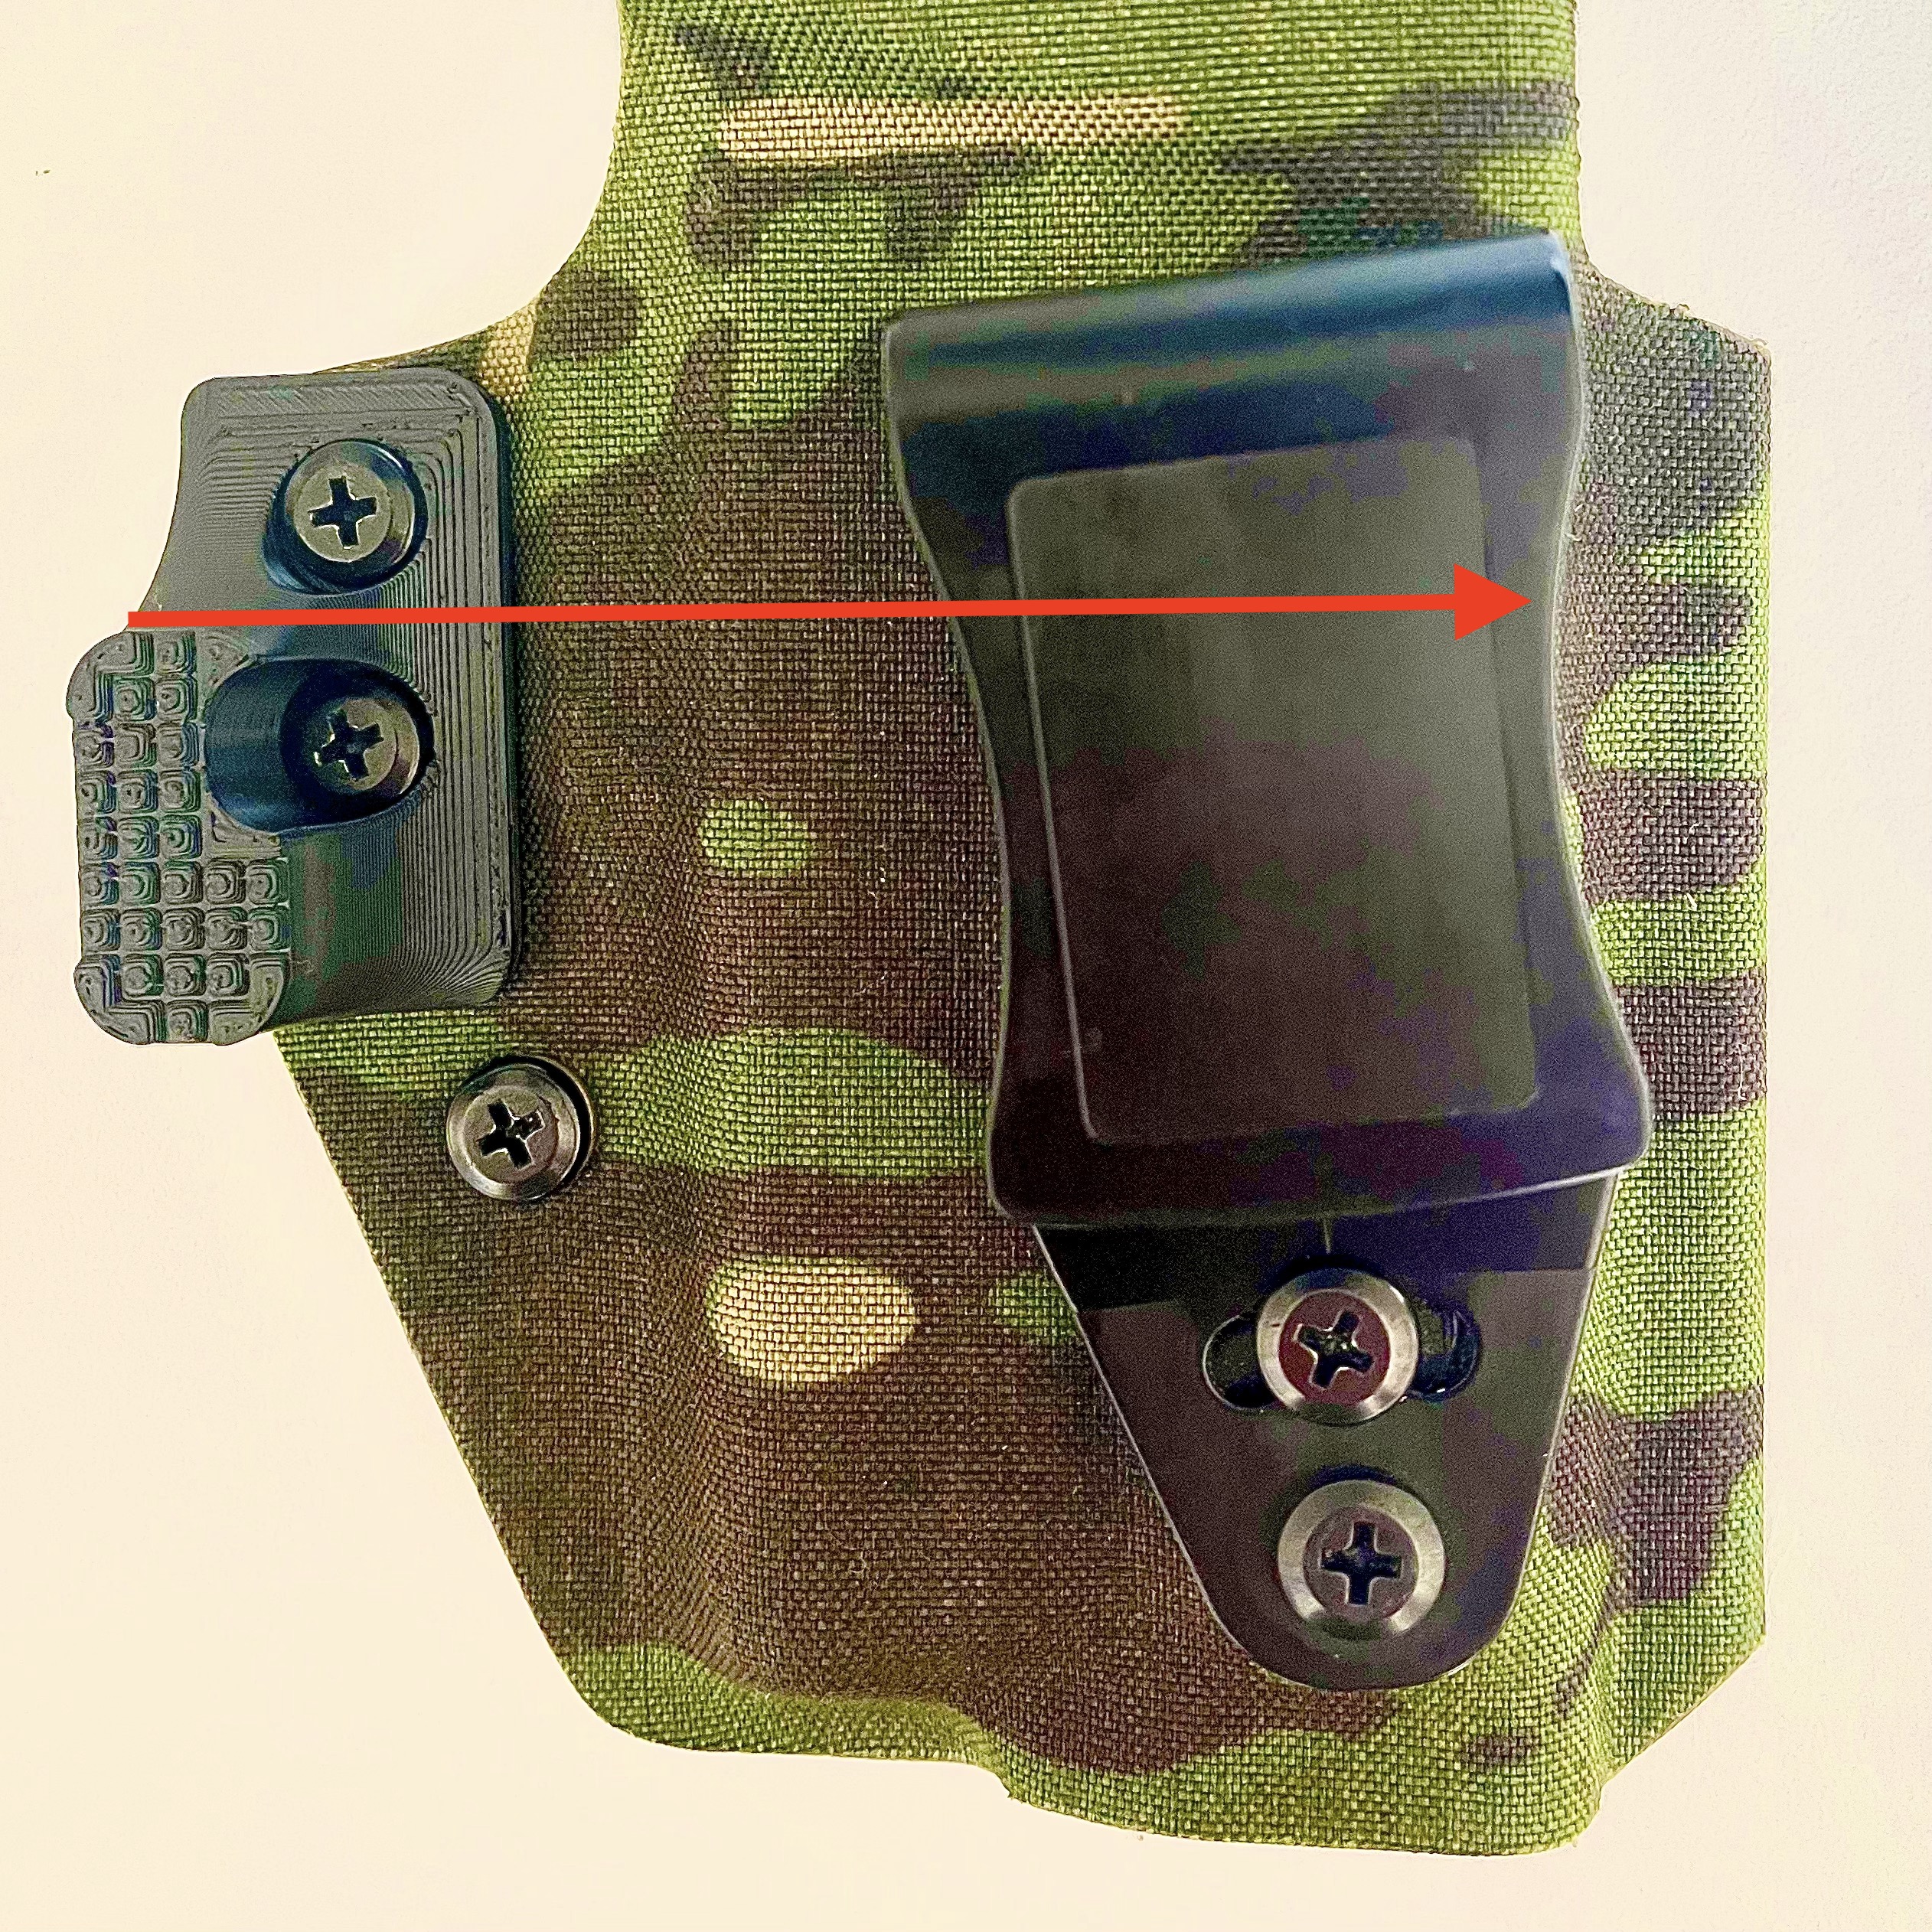 Holster Claw for QVO Tactical Holsters